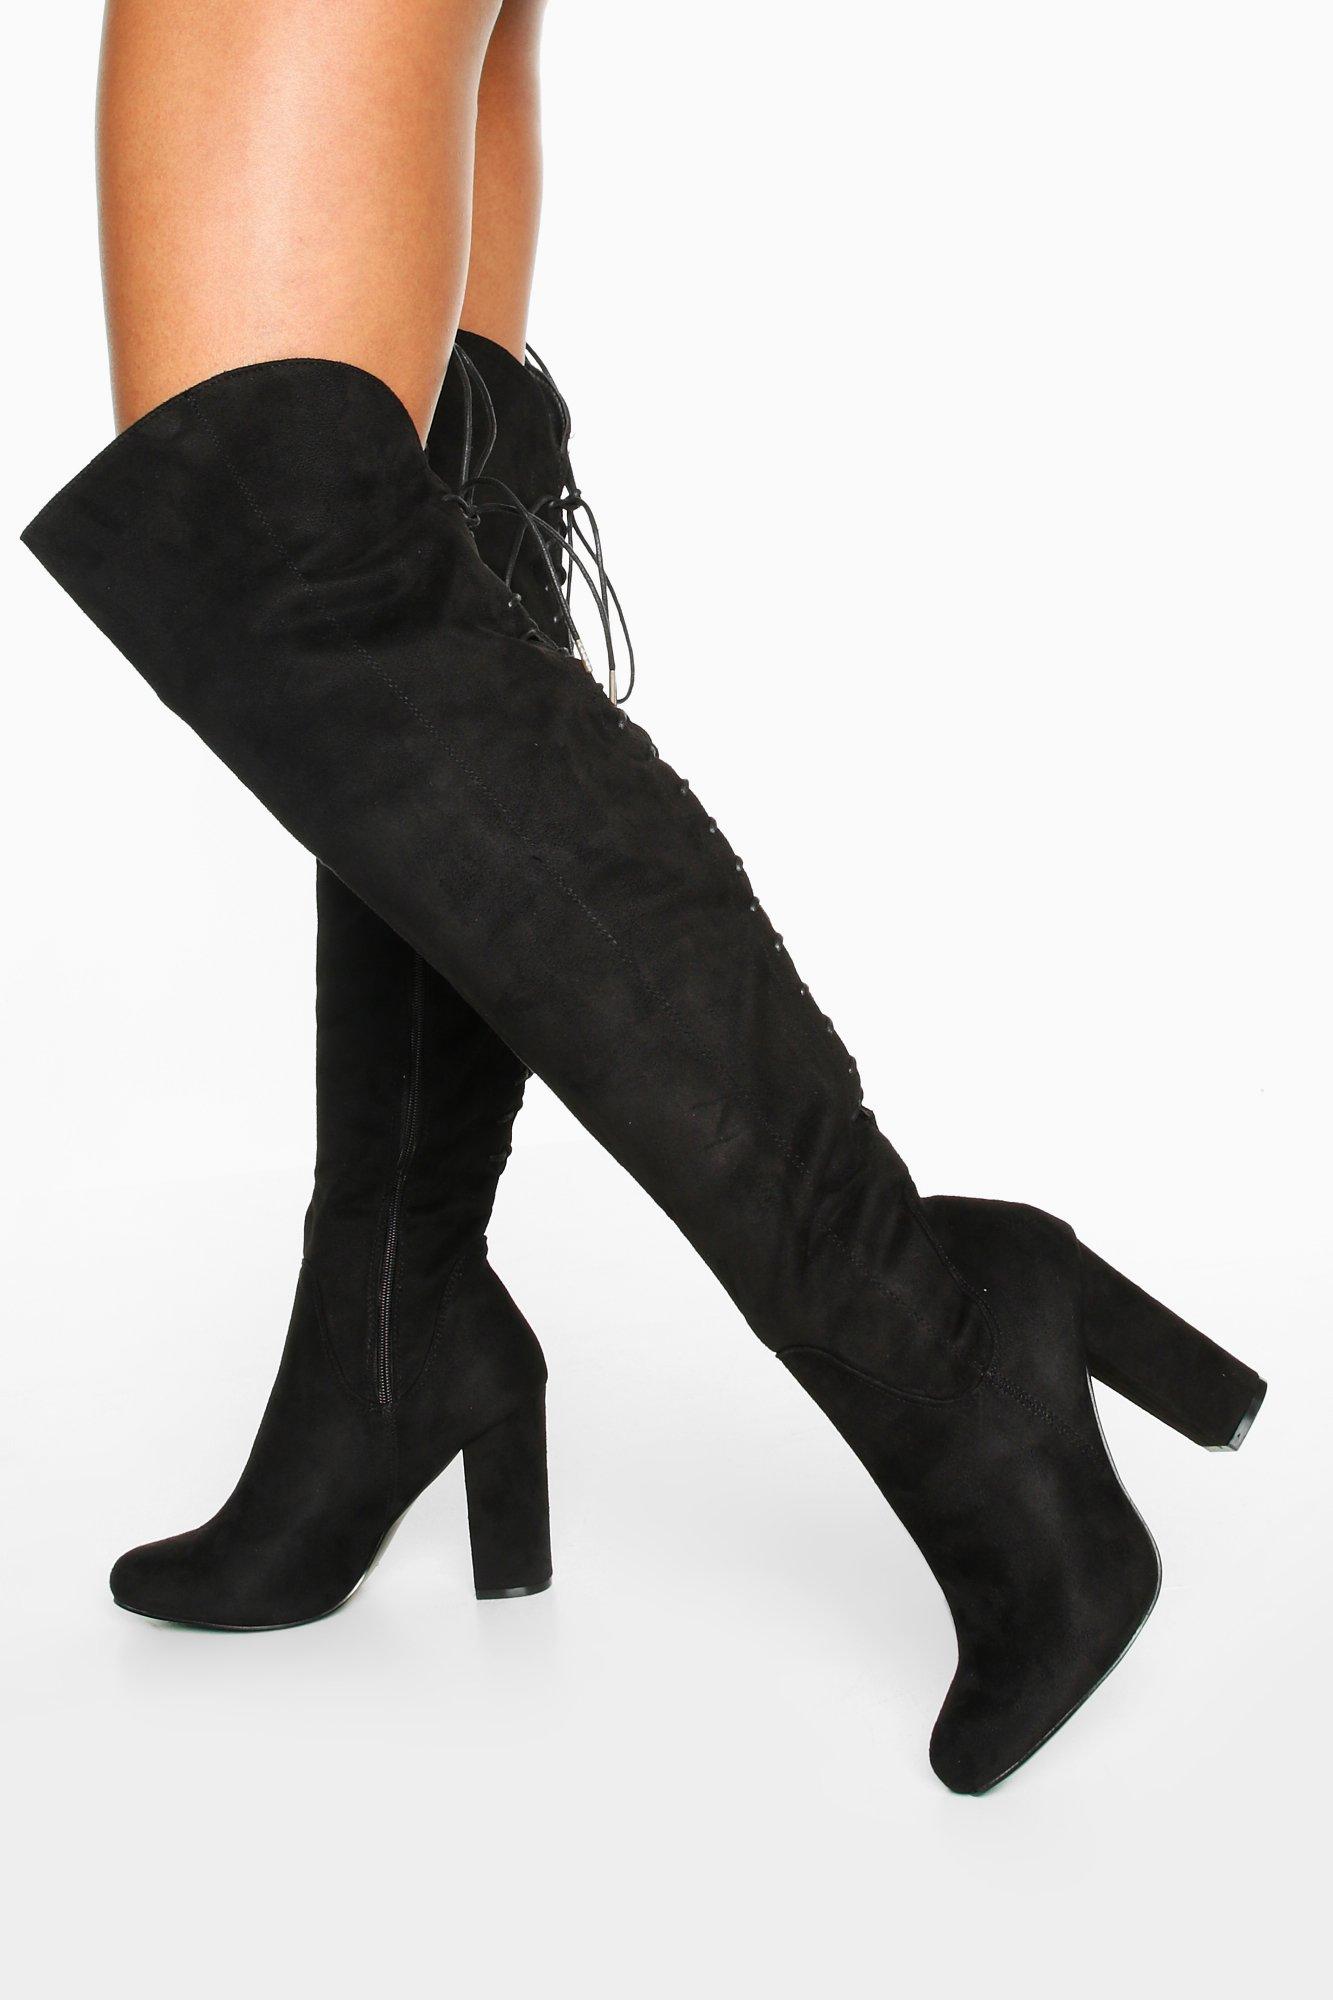 Winter on Shoes Lace-up Boots Suede Leather Over The Knee Boots High Heeled Thick Boot 